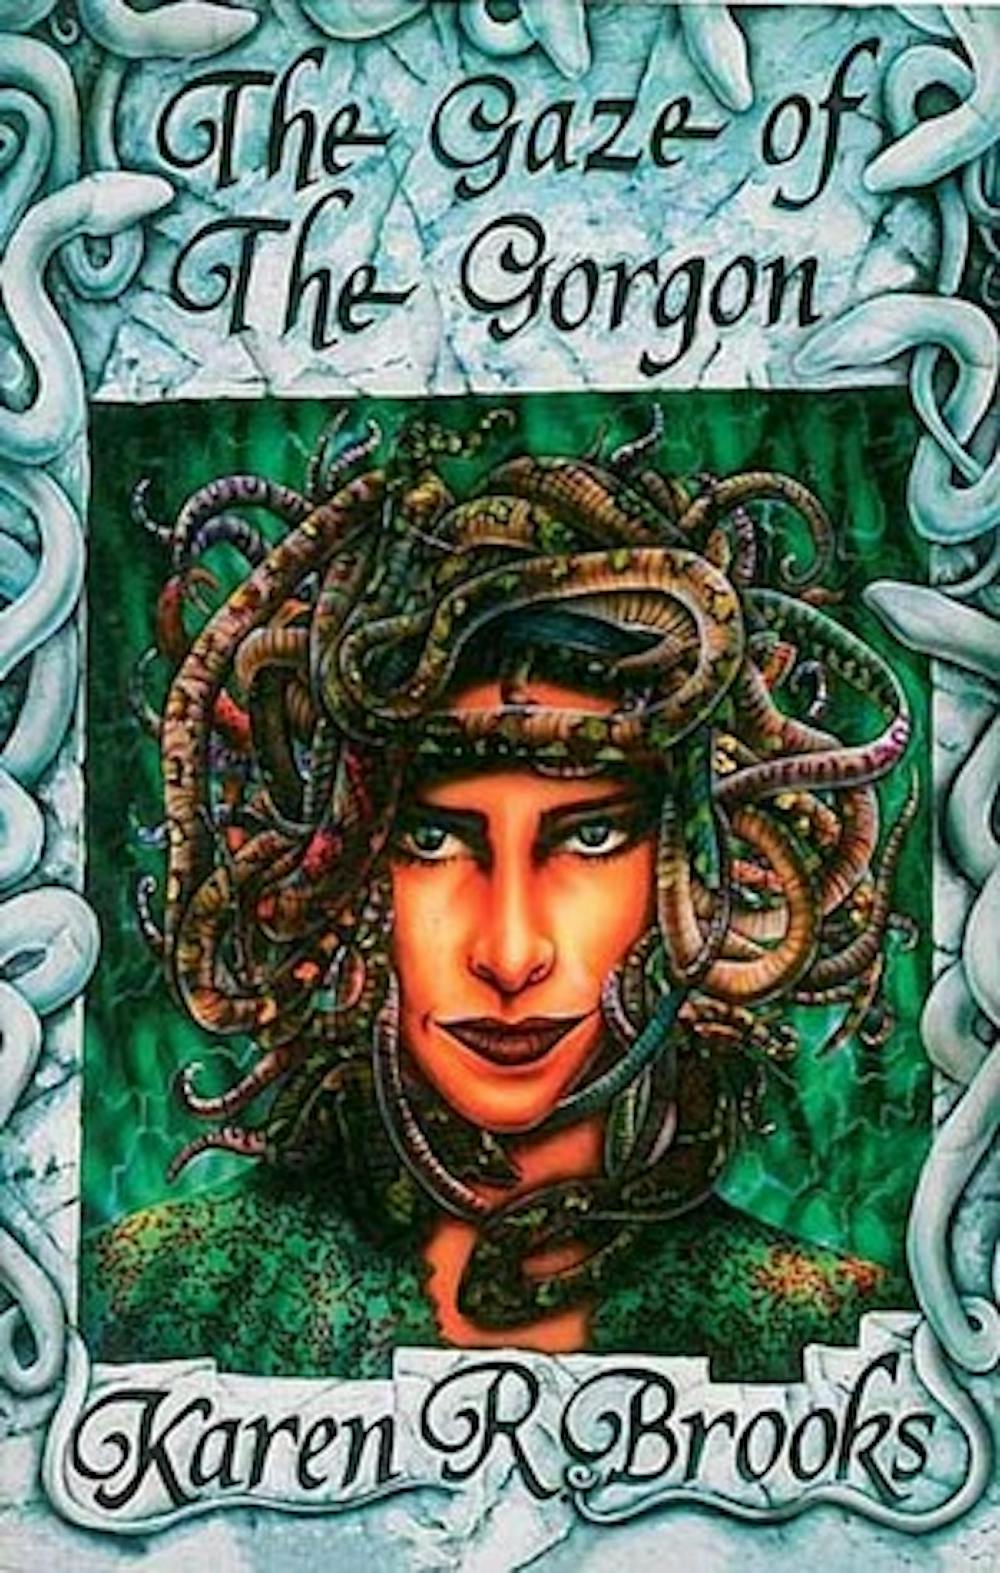 The Gaze of Medusa, by me (#6 in my Quest for the Gorgon Head